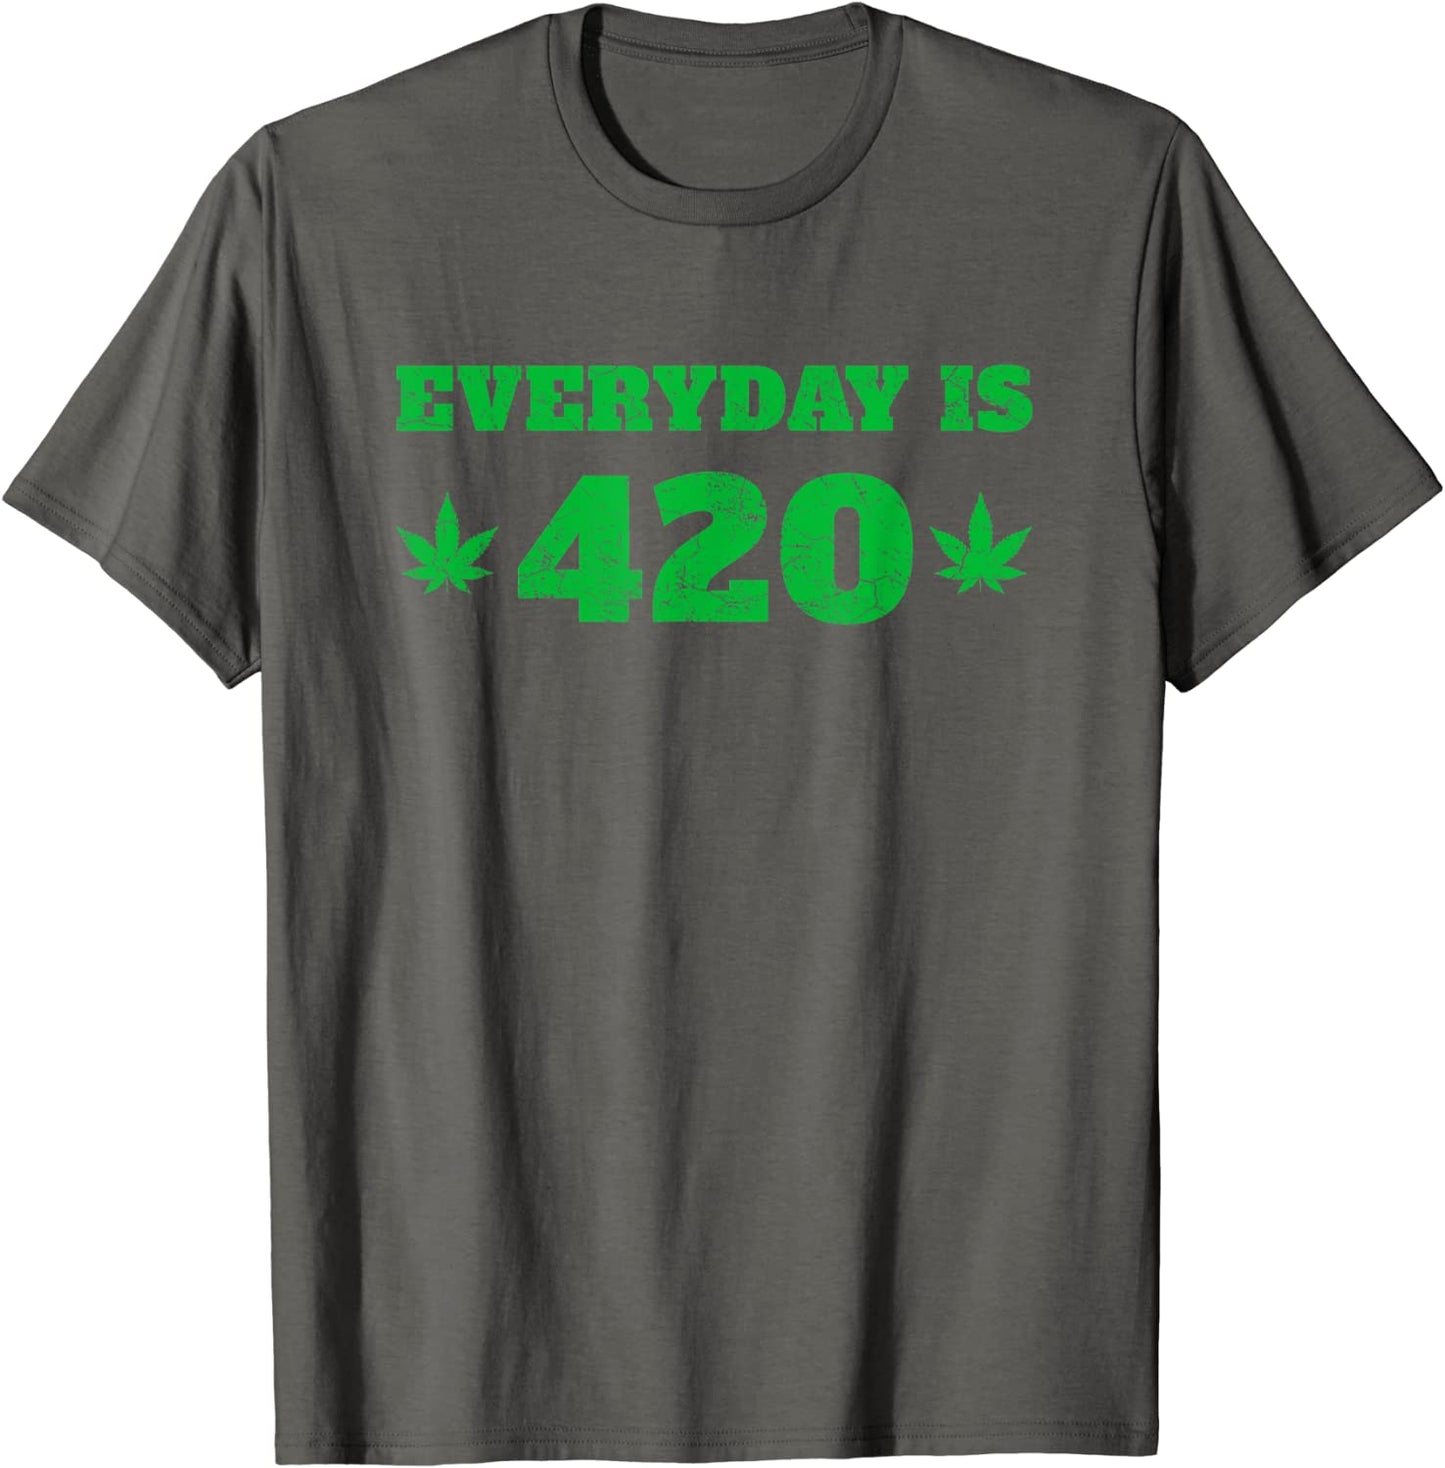 420 Collection "EveryDay Is 420" T-Shirt